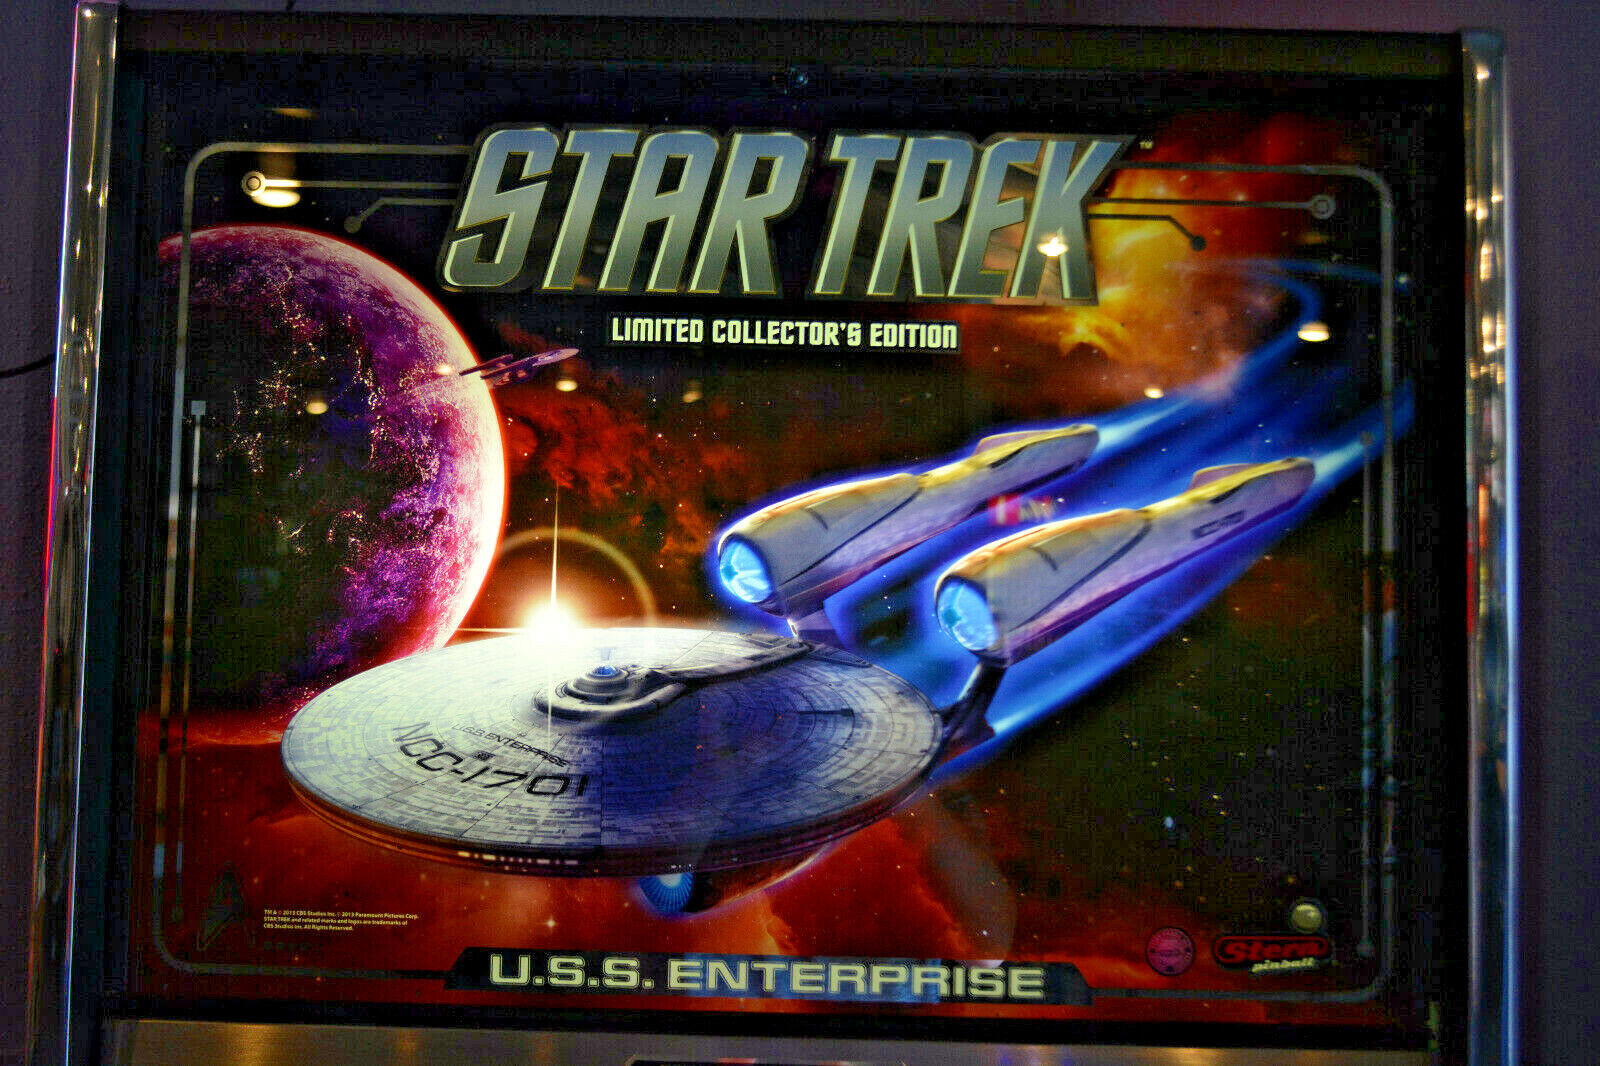 Stern * STAR TREK U.S.S. Enterprise LE (#317 of 799) pInball game with topper  